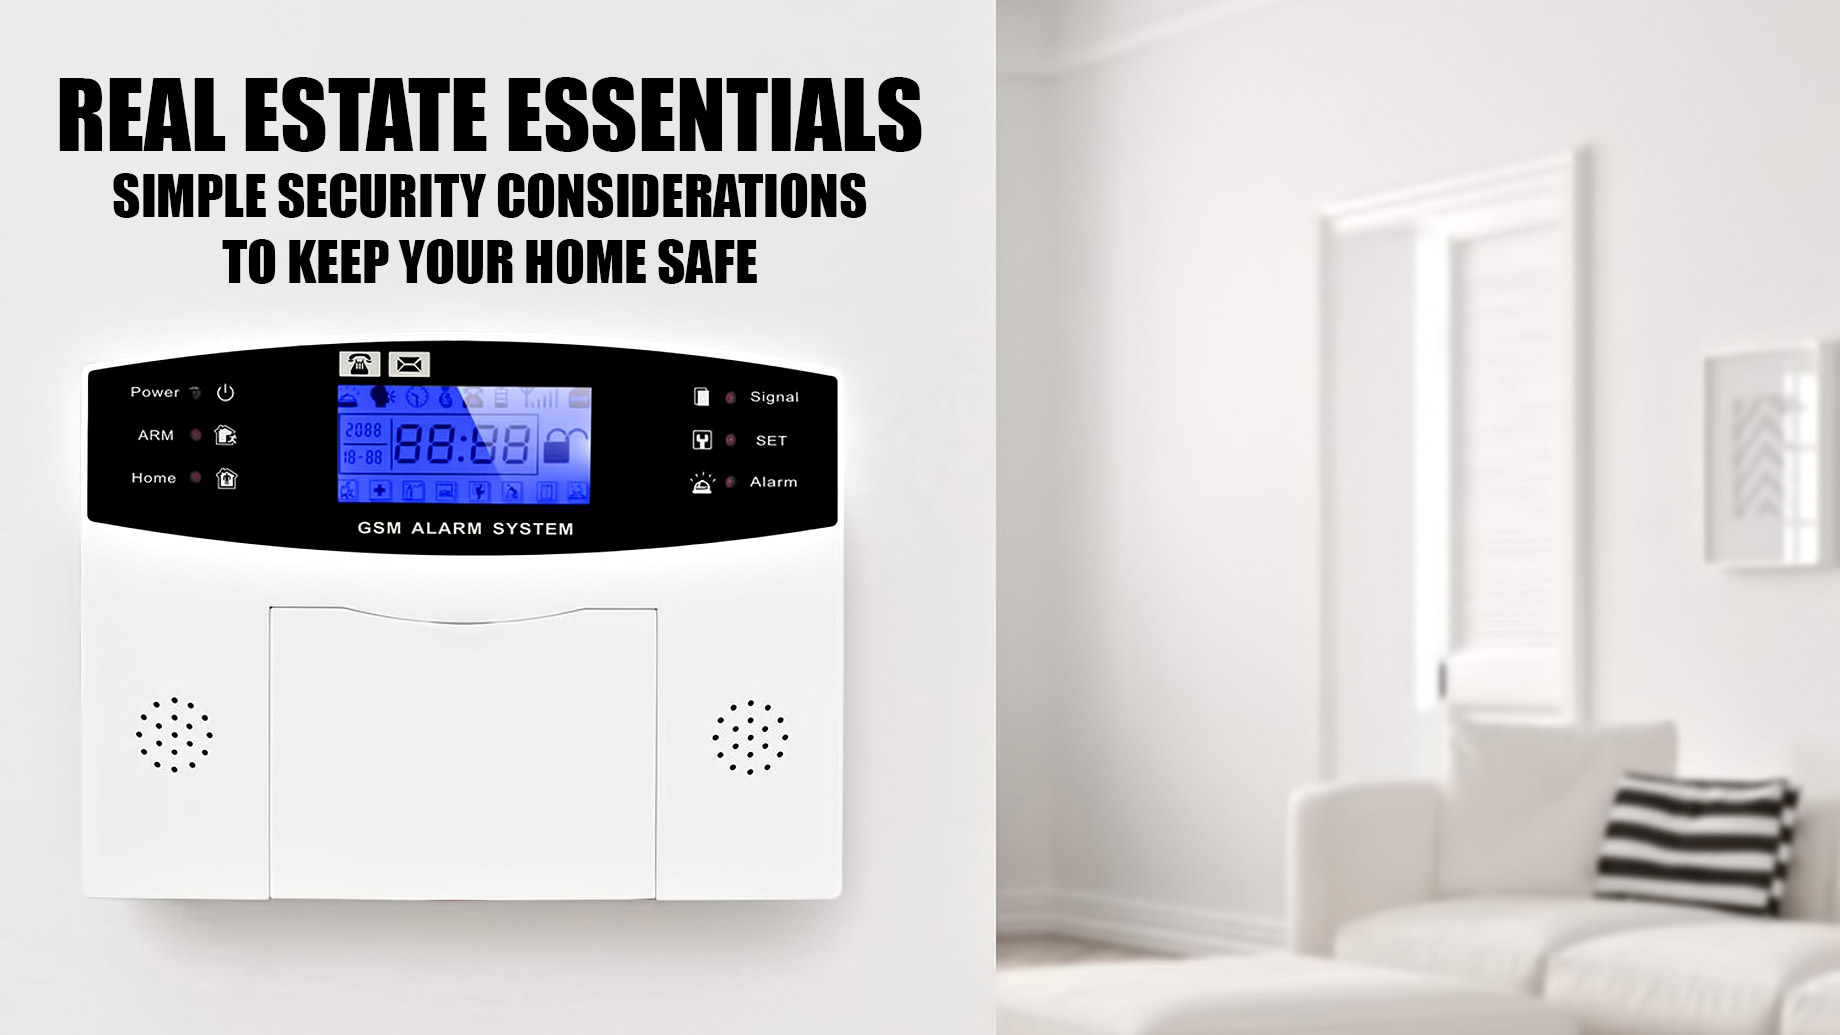 Real Estate Essentials - Simple Security Considerations To Keep Your Home Safe